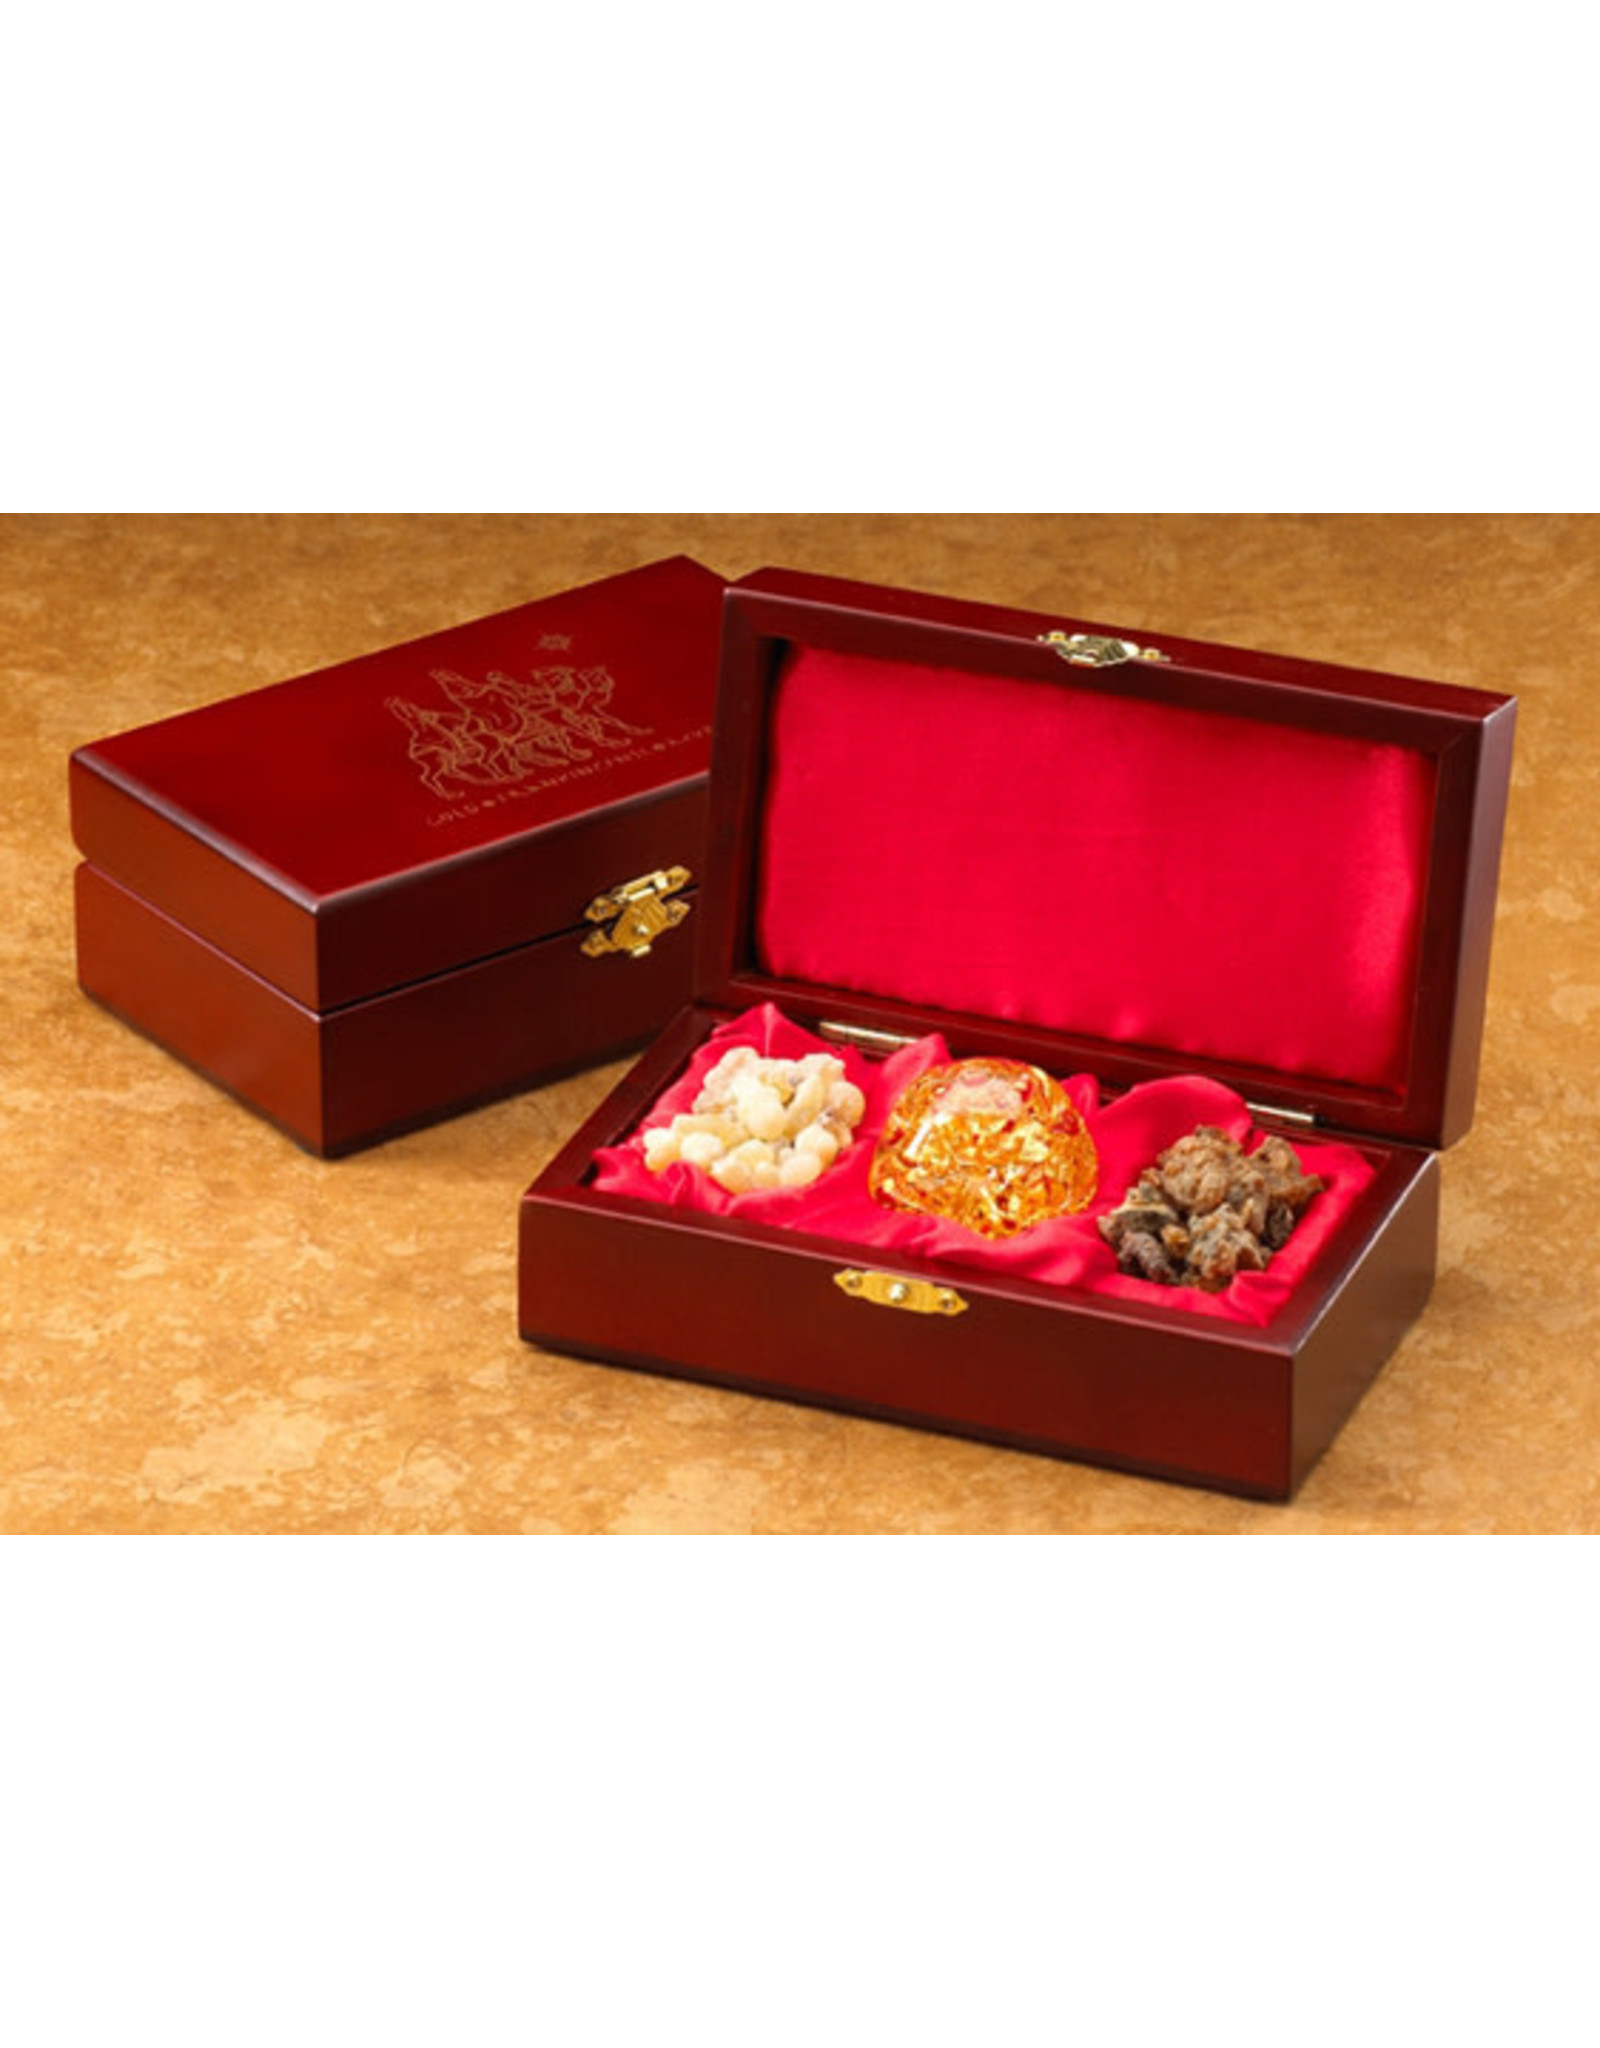 Three Kings Gifts The Original Gifts of Christmas - Gold, Frankincense and Myrrh - Single Box Set